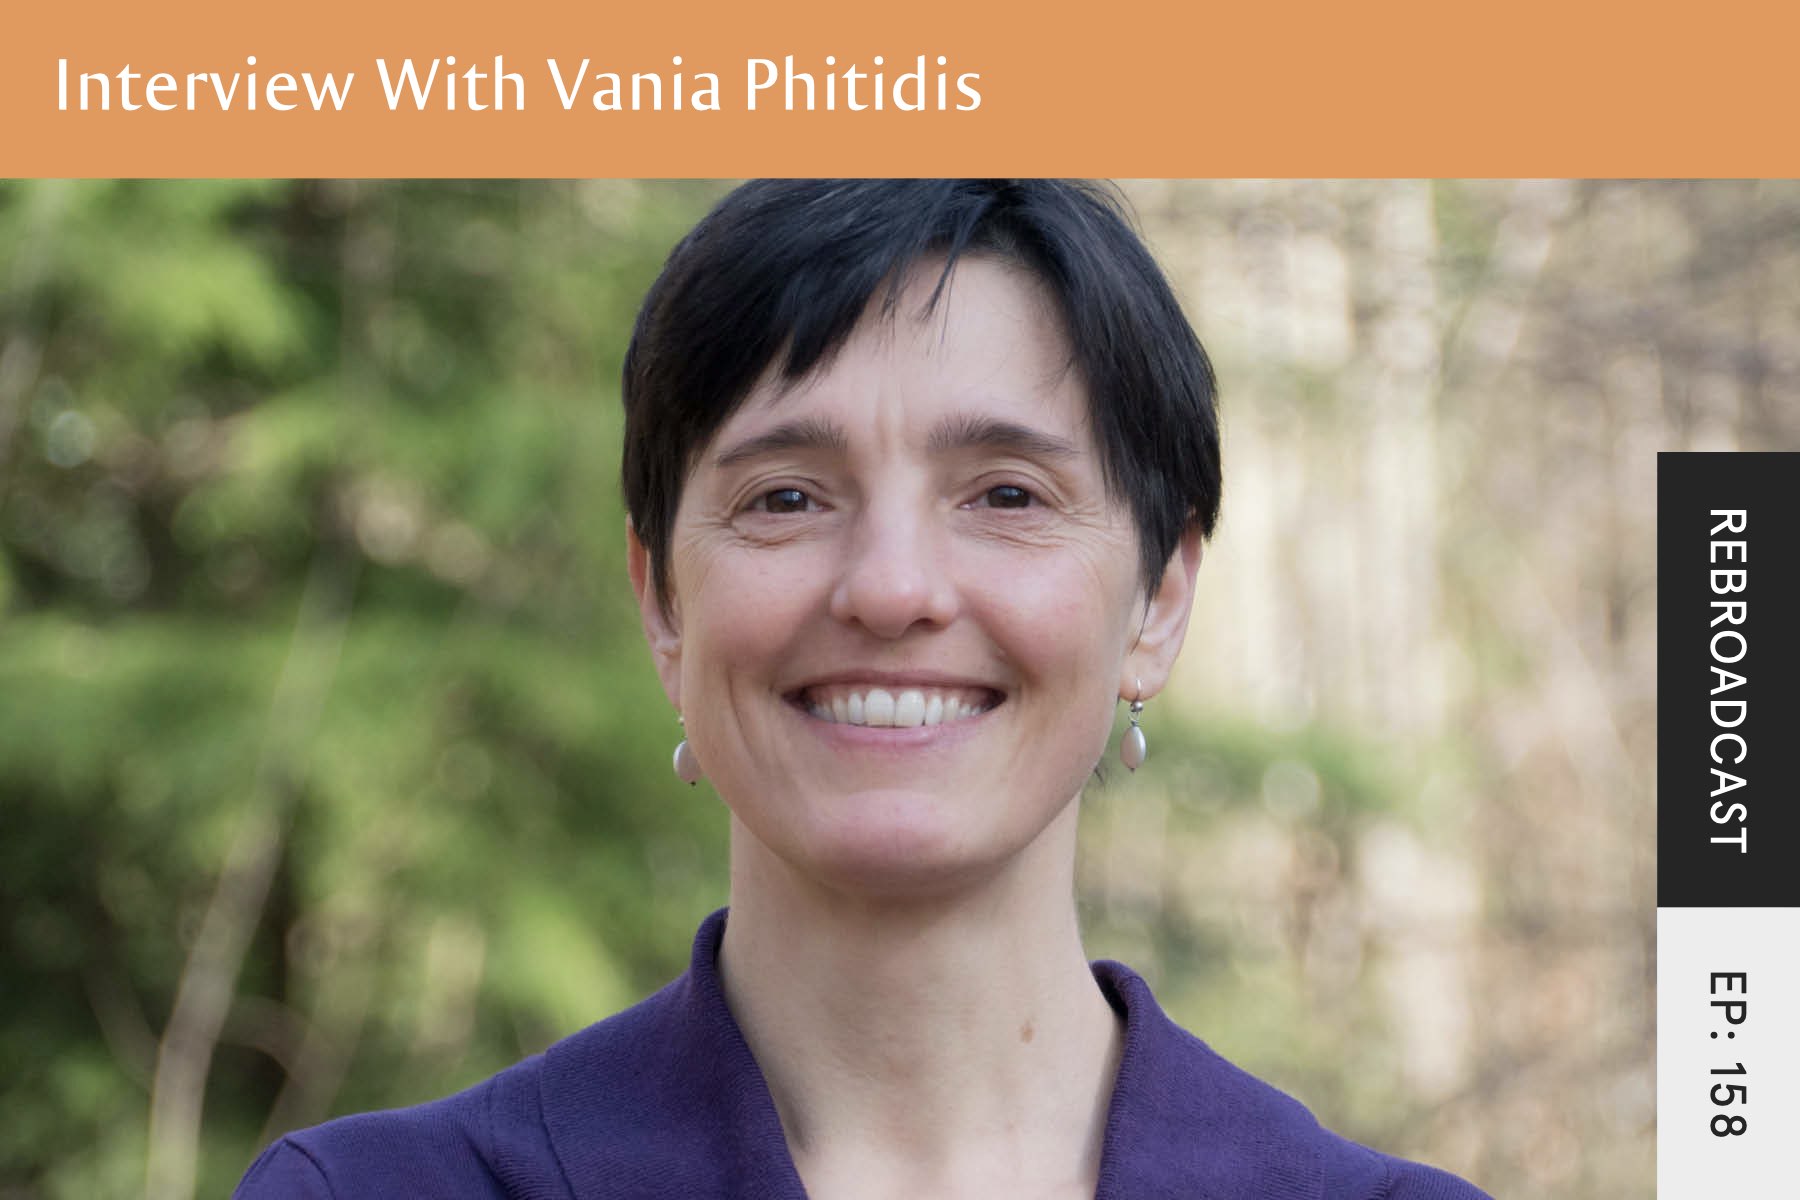 Rebroadcast: Interview with Vania Phitidis - Seven Health: Eating Disorder Recovery and Anti Diet Nutritionist